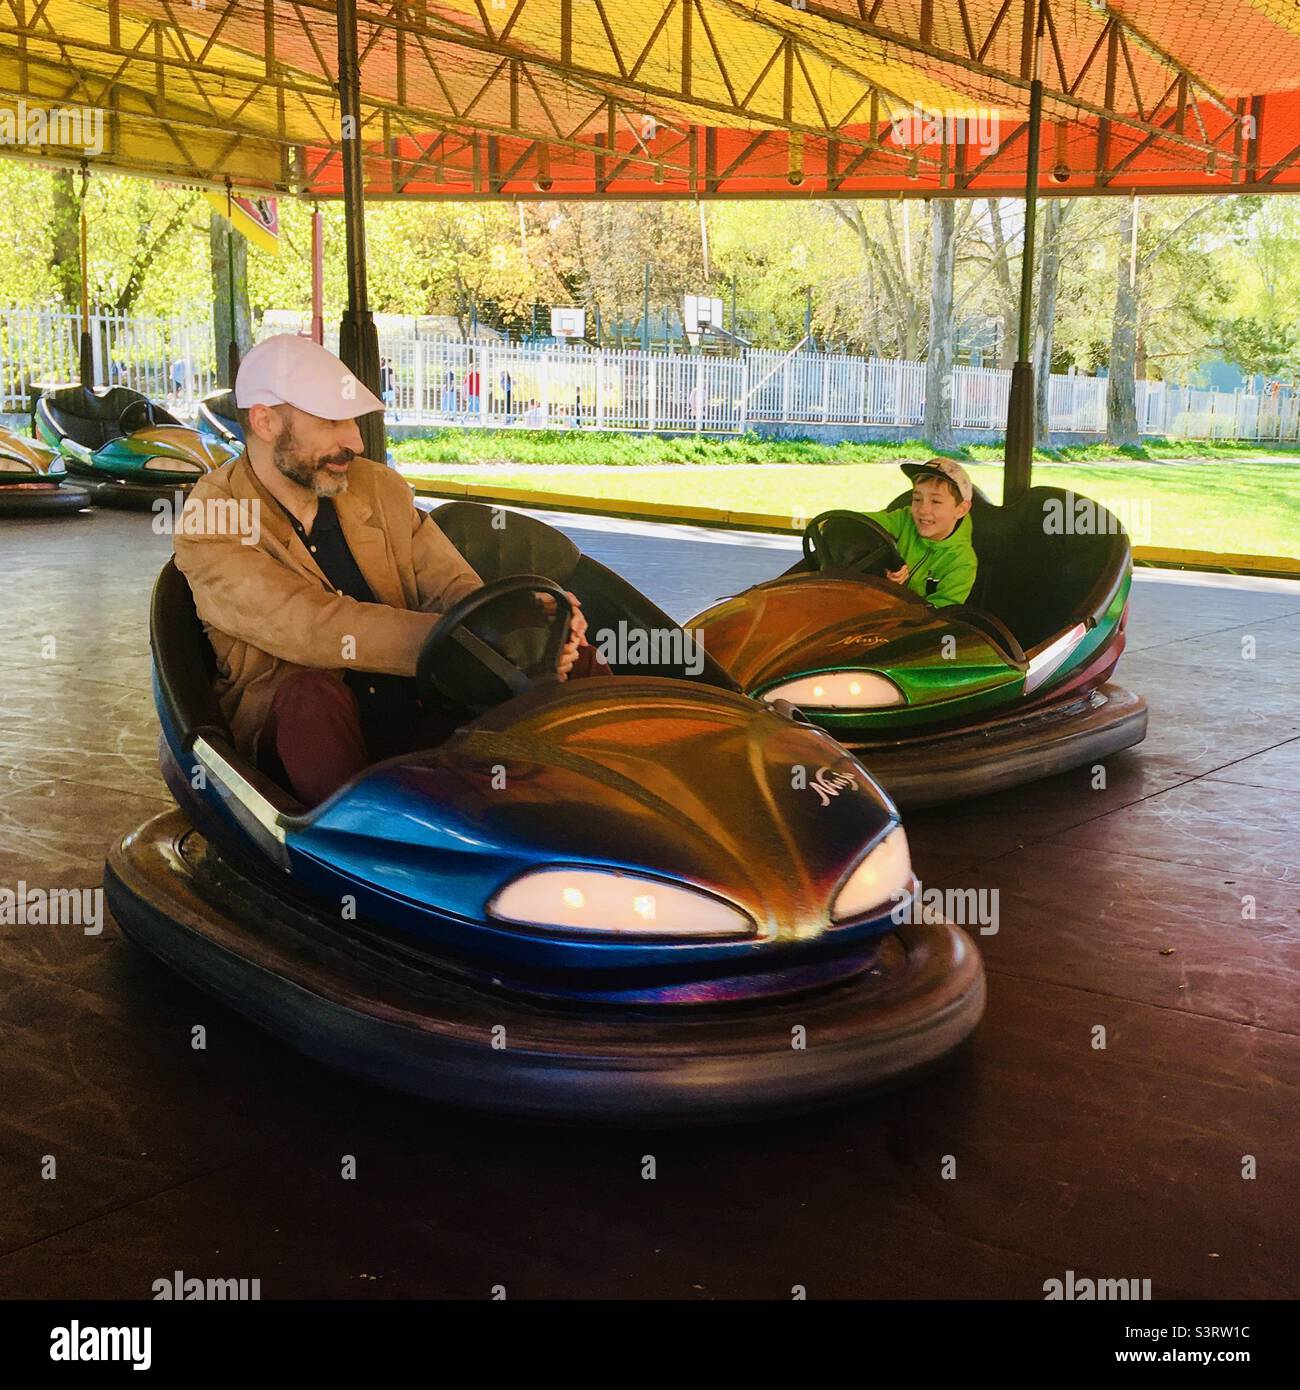 Father and son riding dodgem bumper cars at funfair, Sopron, Hungary Stock Photo